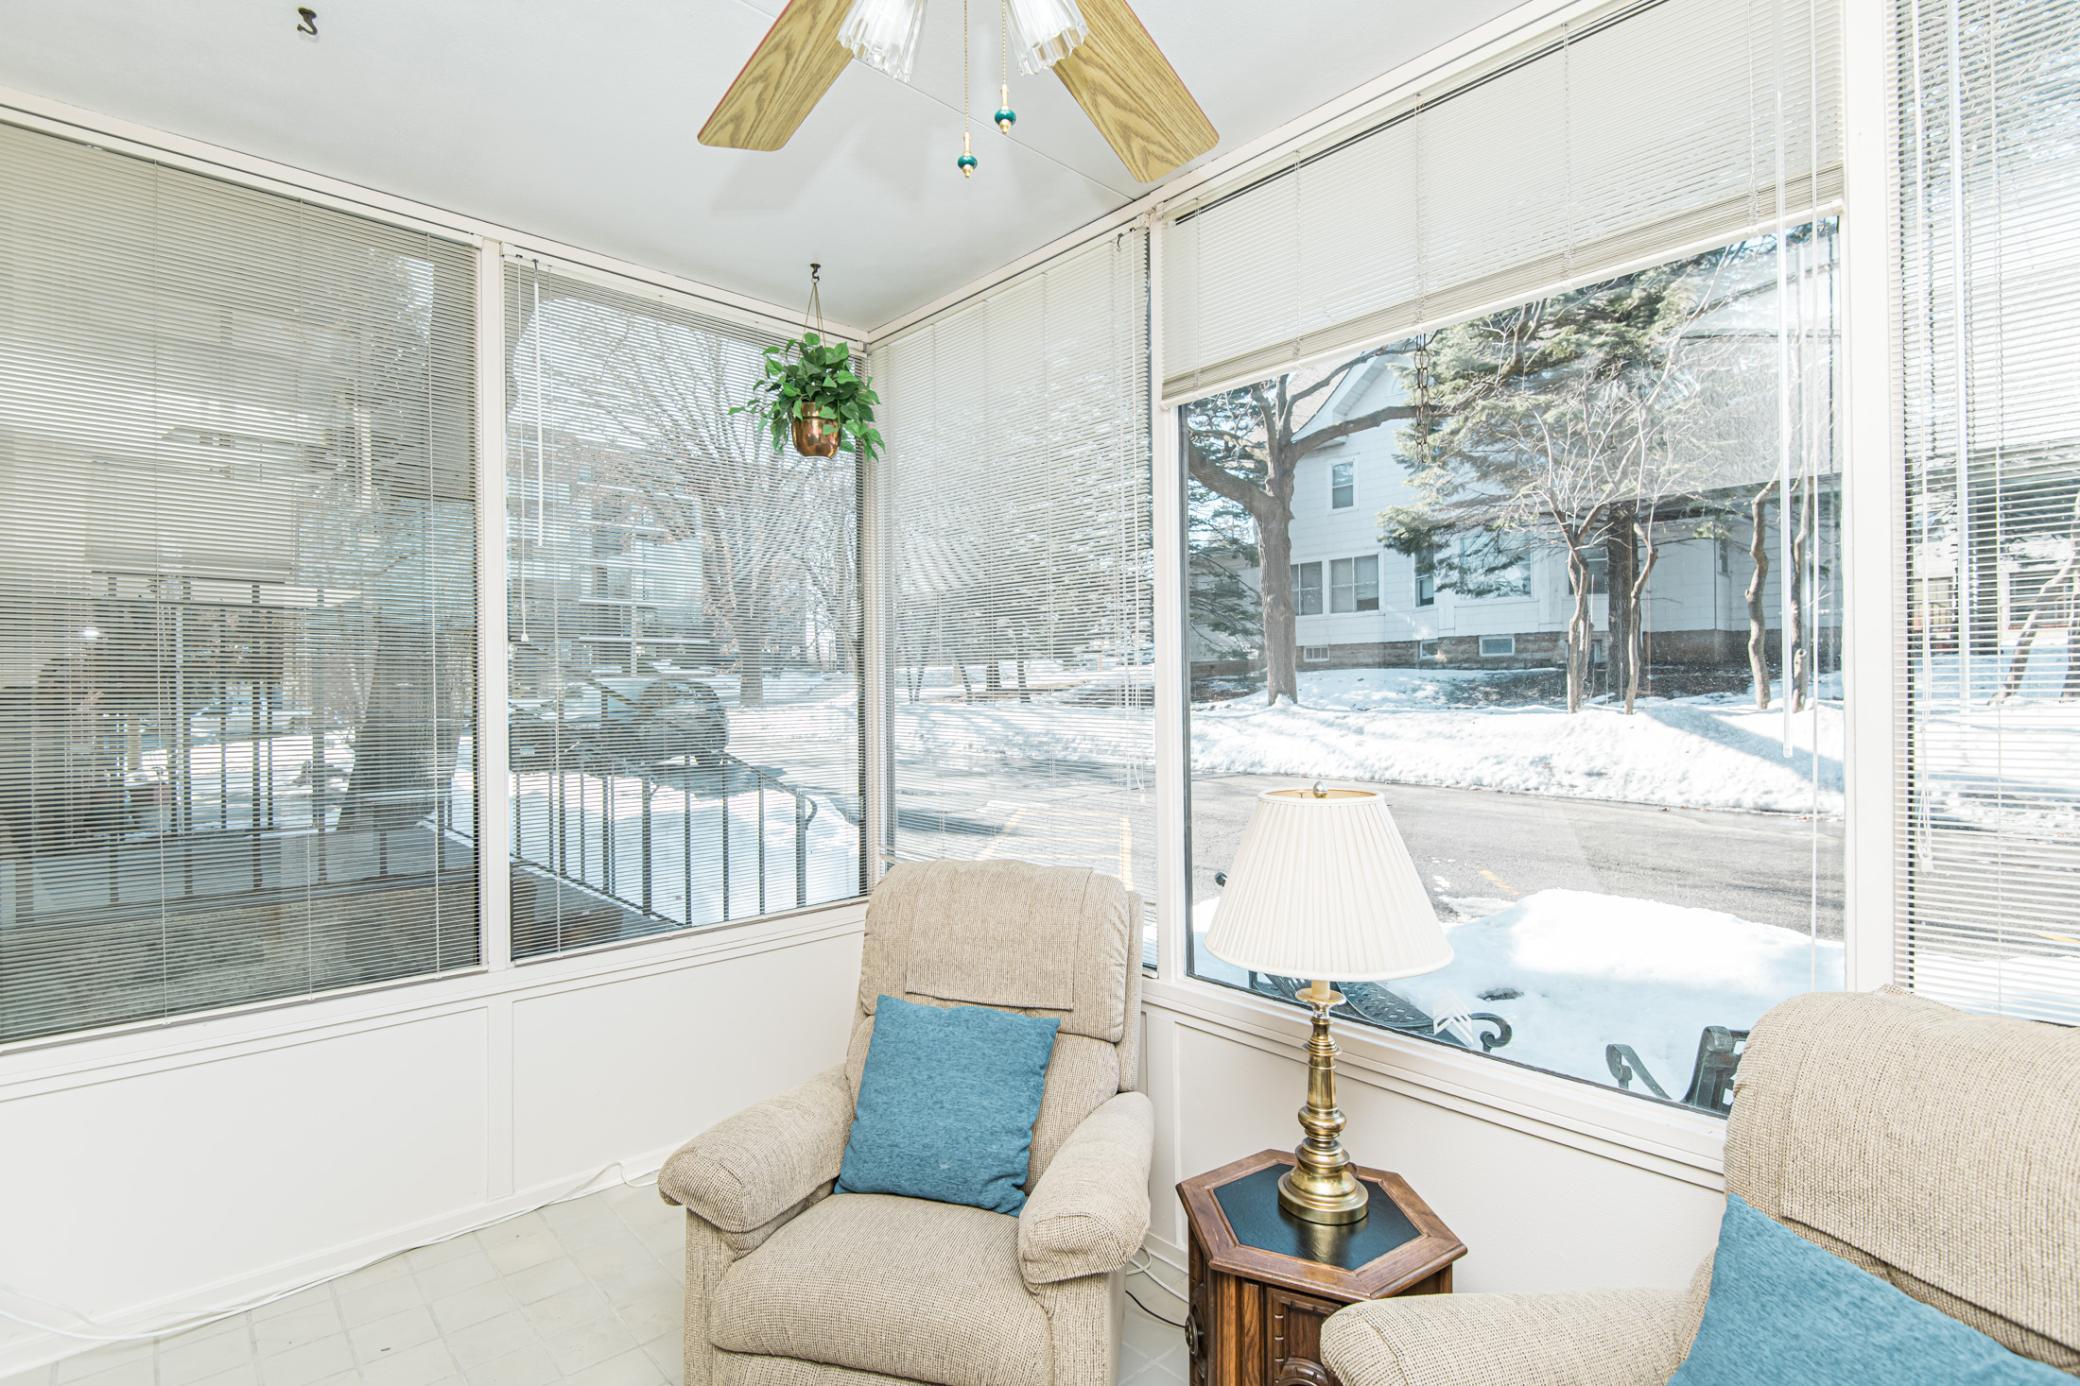 Enjoy the outdoors from your cozy and warm sun room!